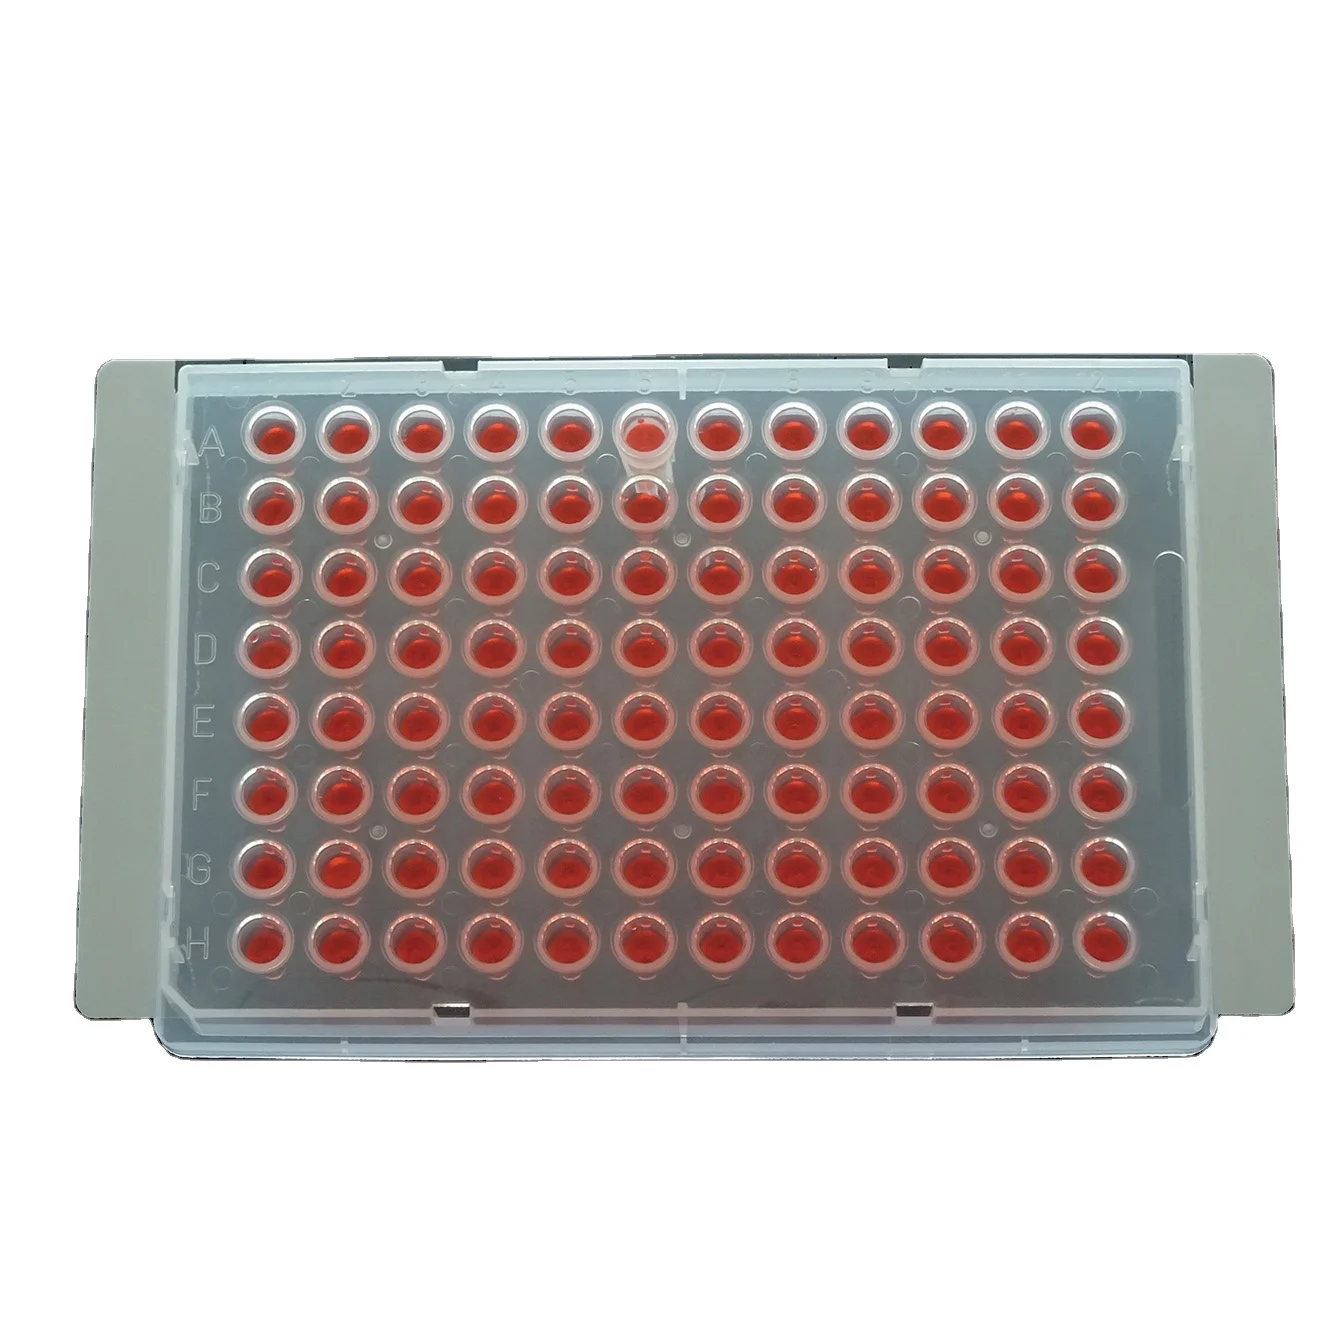 

Labware 96 Well And Deep Well MicroplatePlate Sealing Films Plate Sealers Pcr Plate Sseal Film InOther Lab Supplies